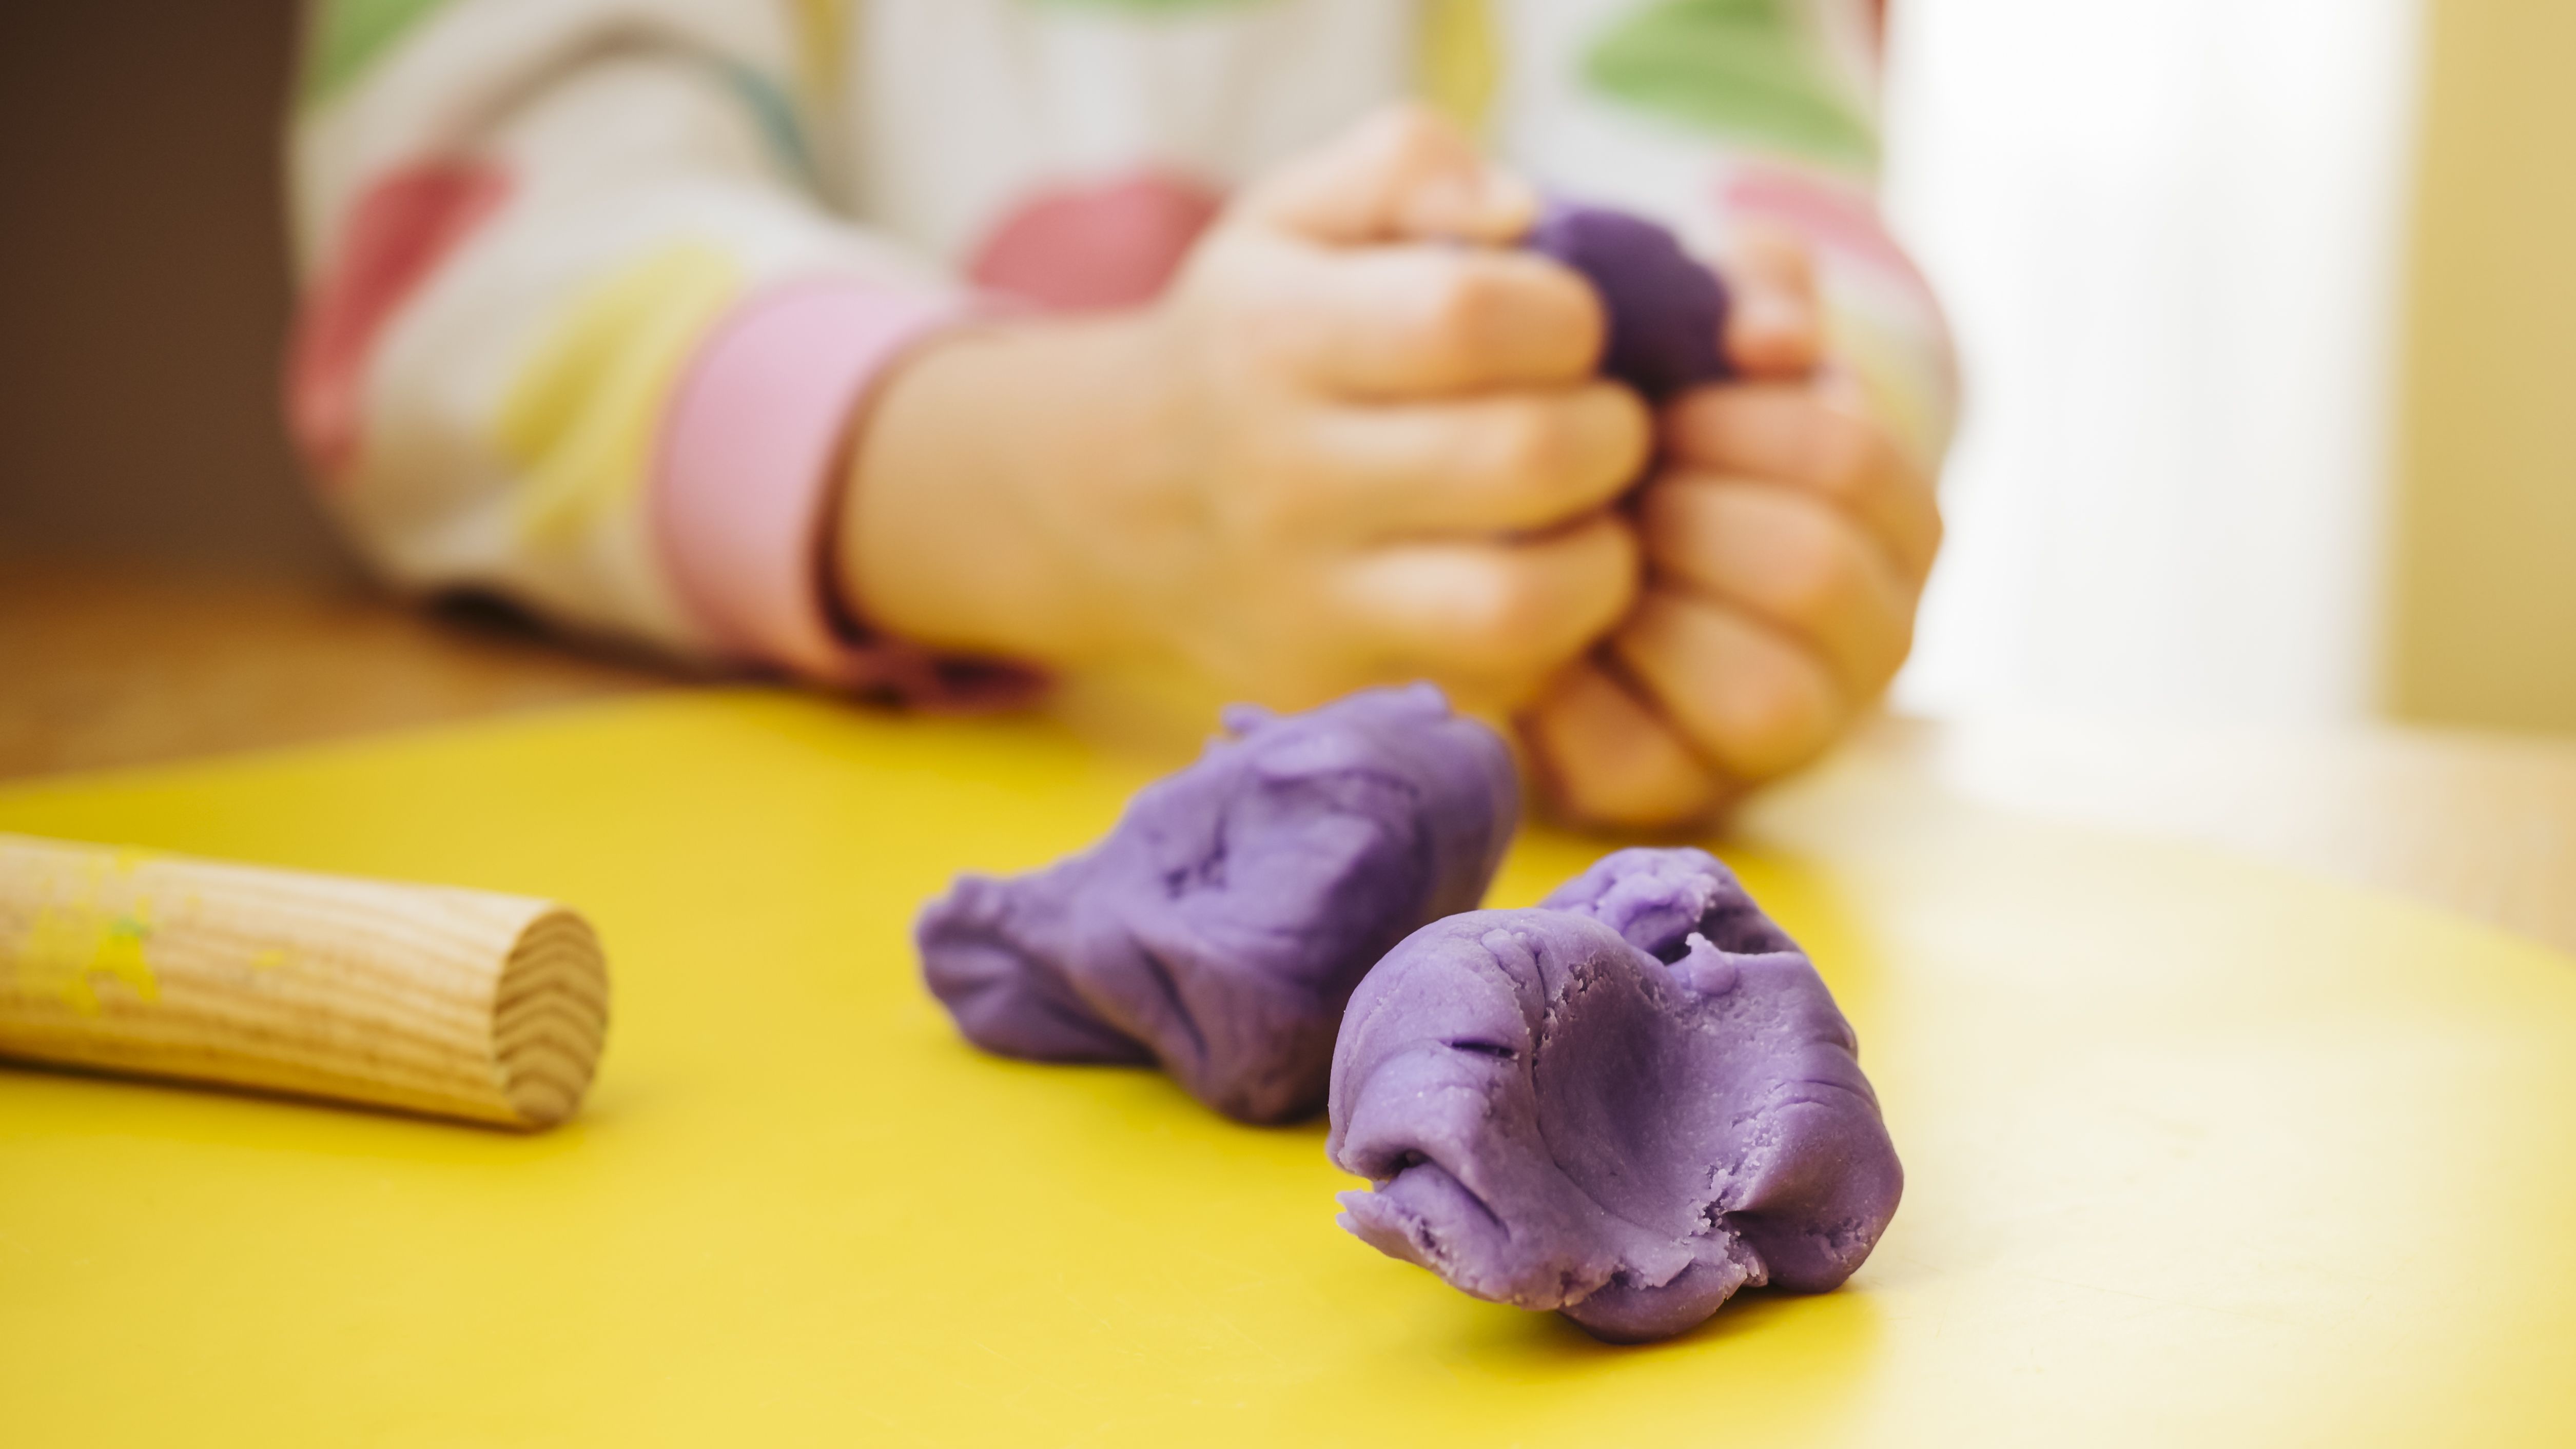 Purchase Edible Clay For Exciting Play 